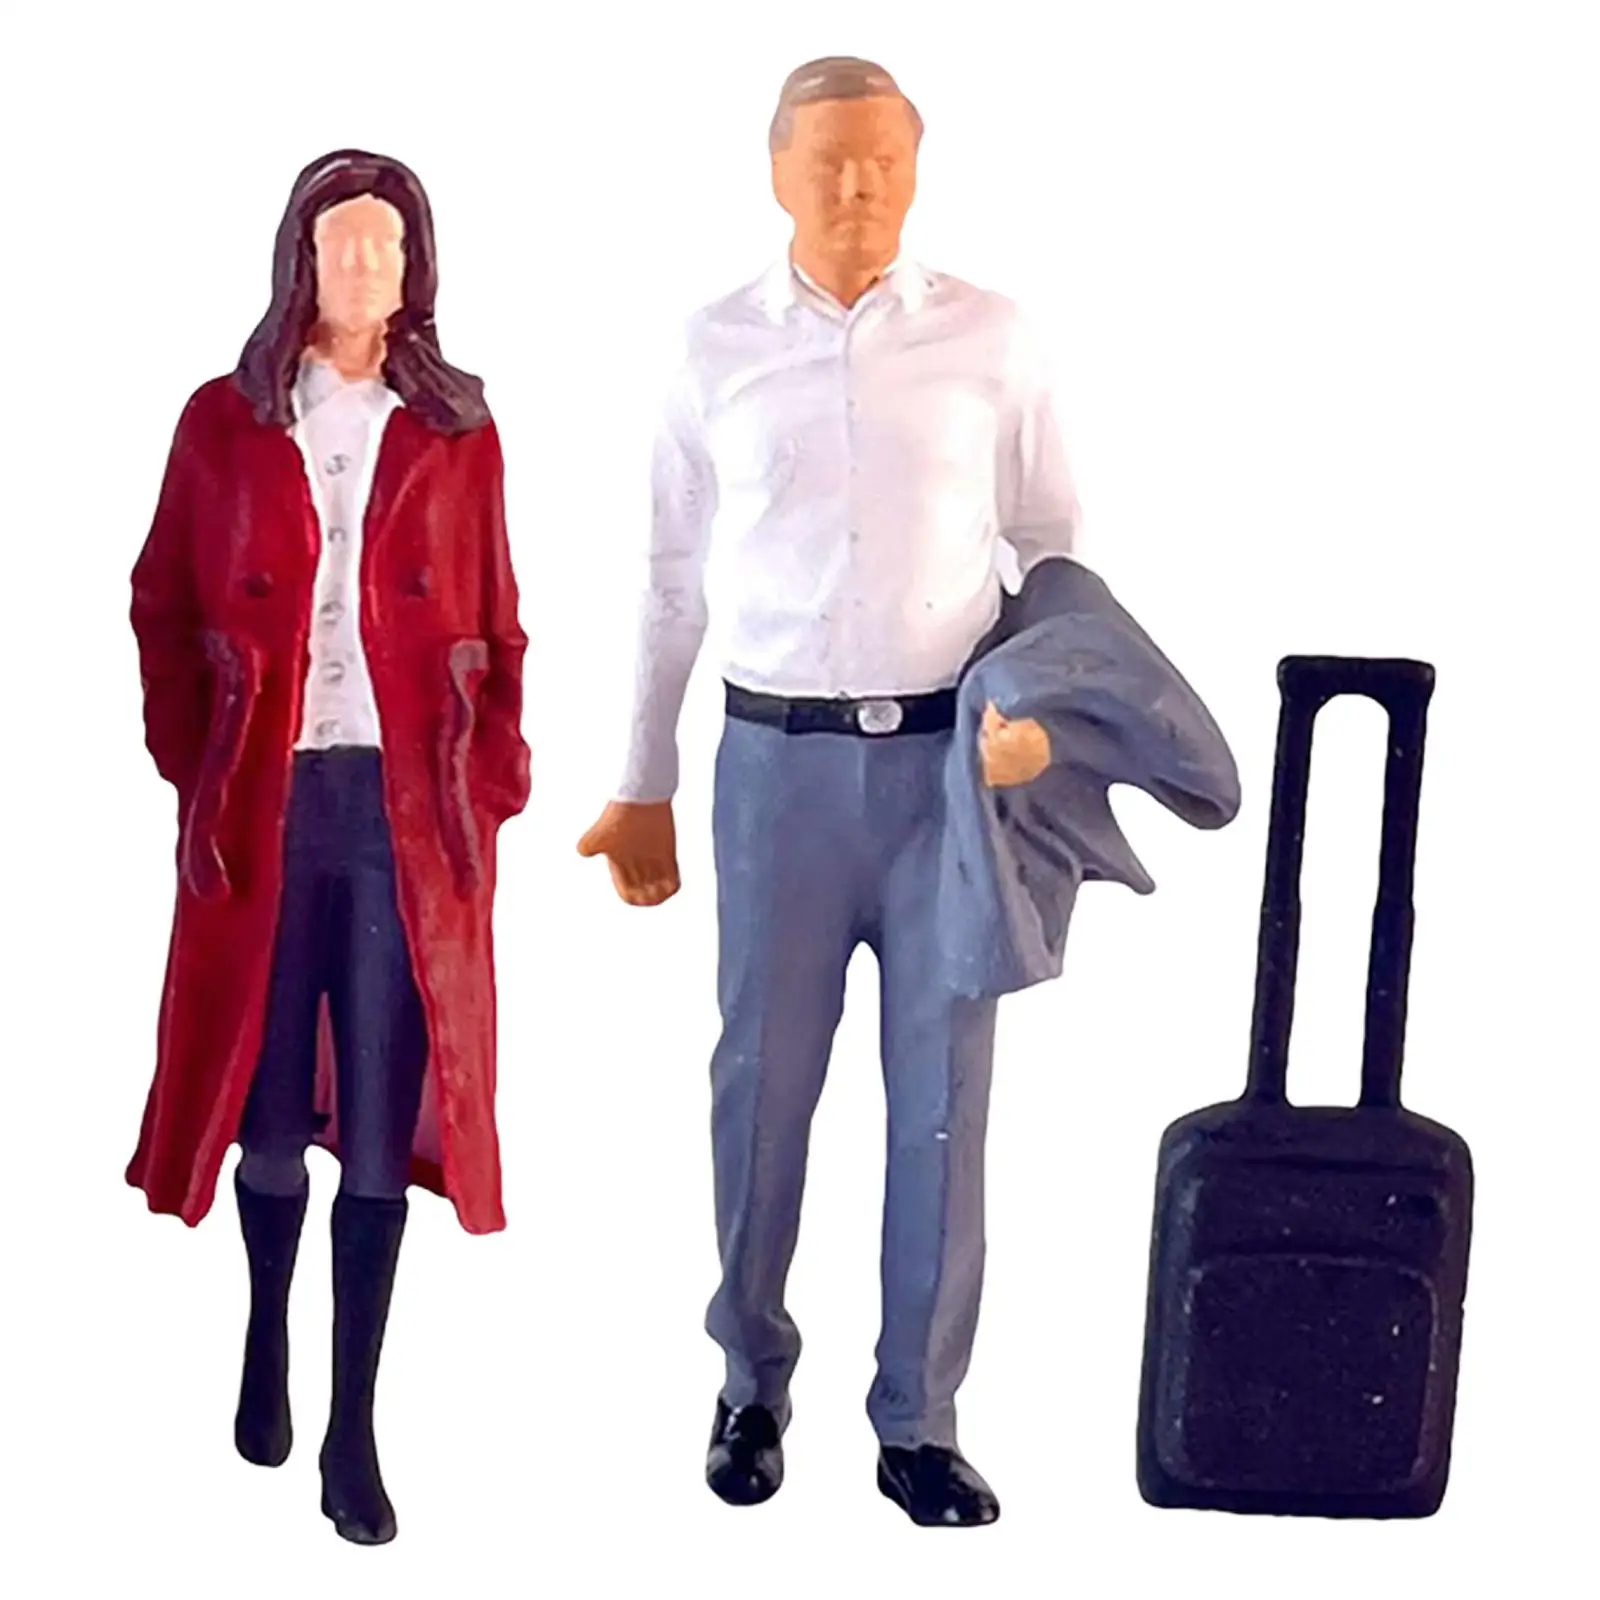 2x 1/64 Women and Men Figures with Suitcase Model S Gauge Sand Table Layout Decoration Dioramas Hand Painted Figurines Decor